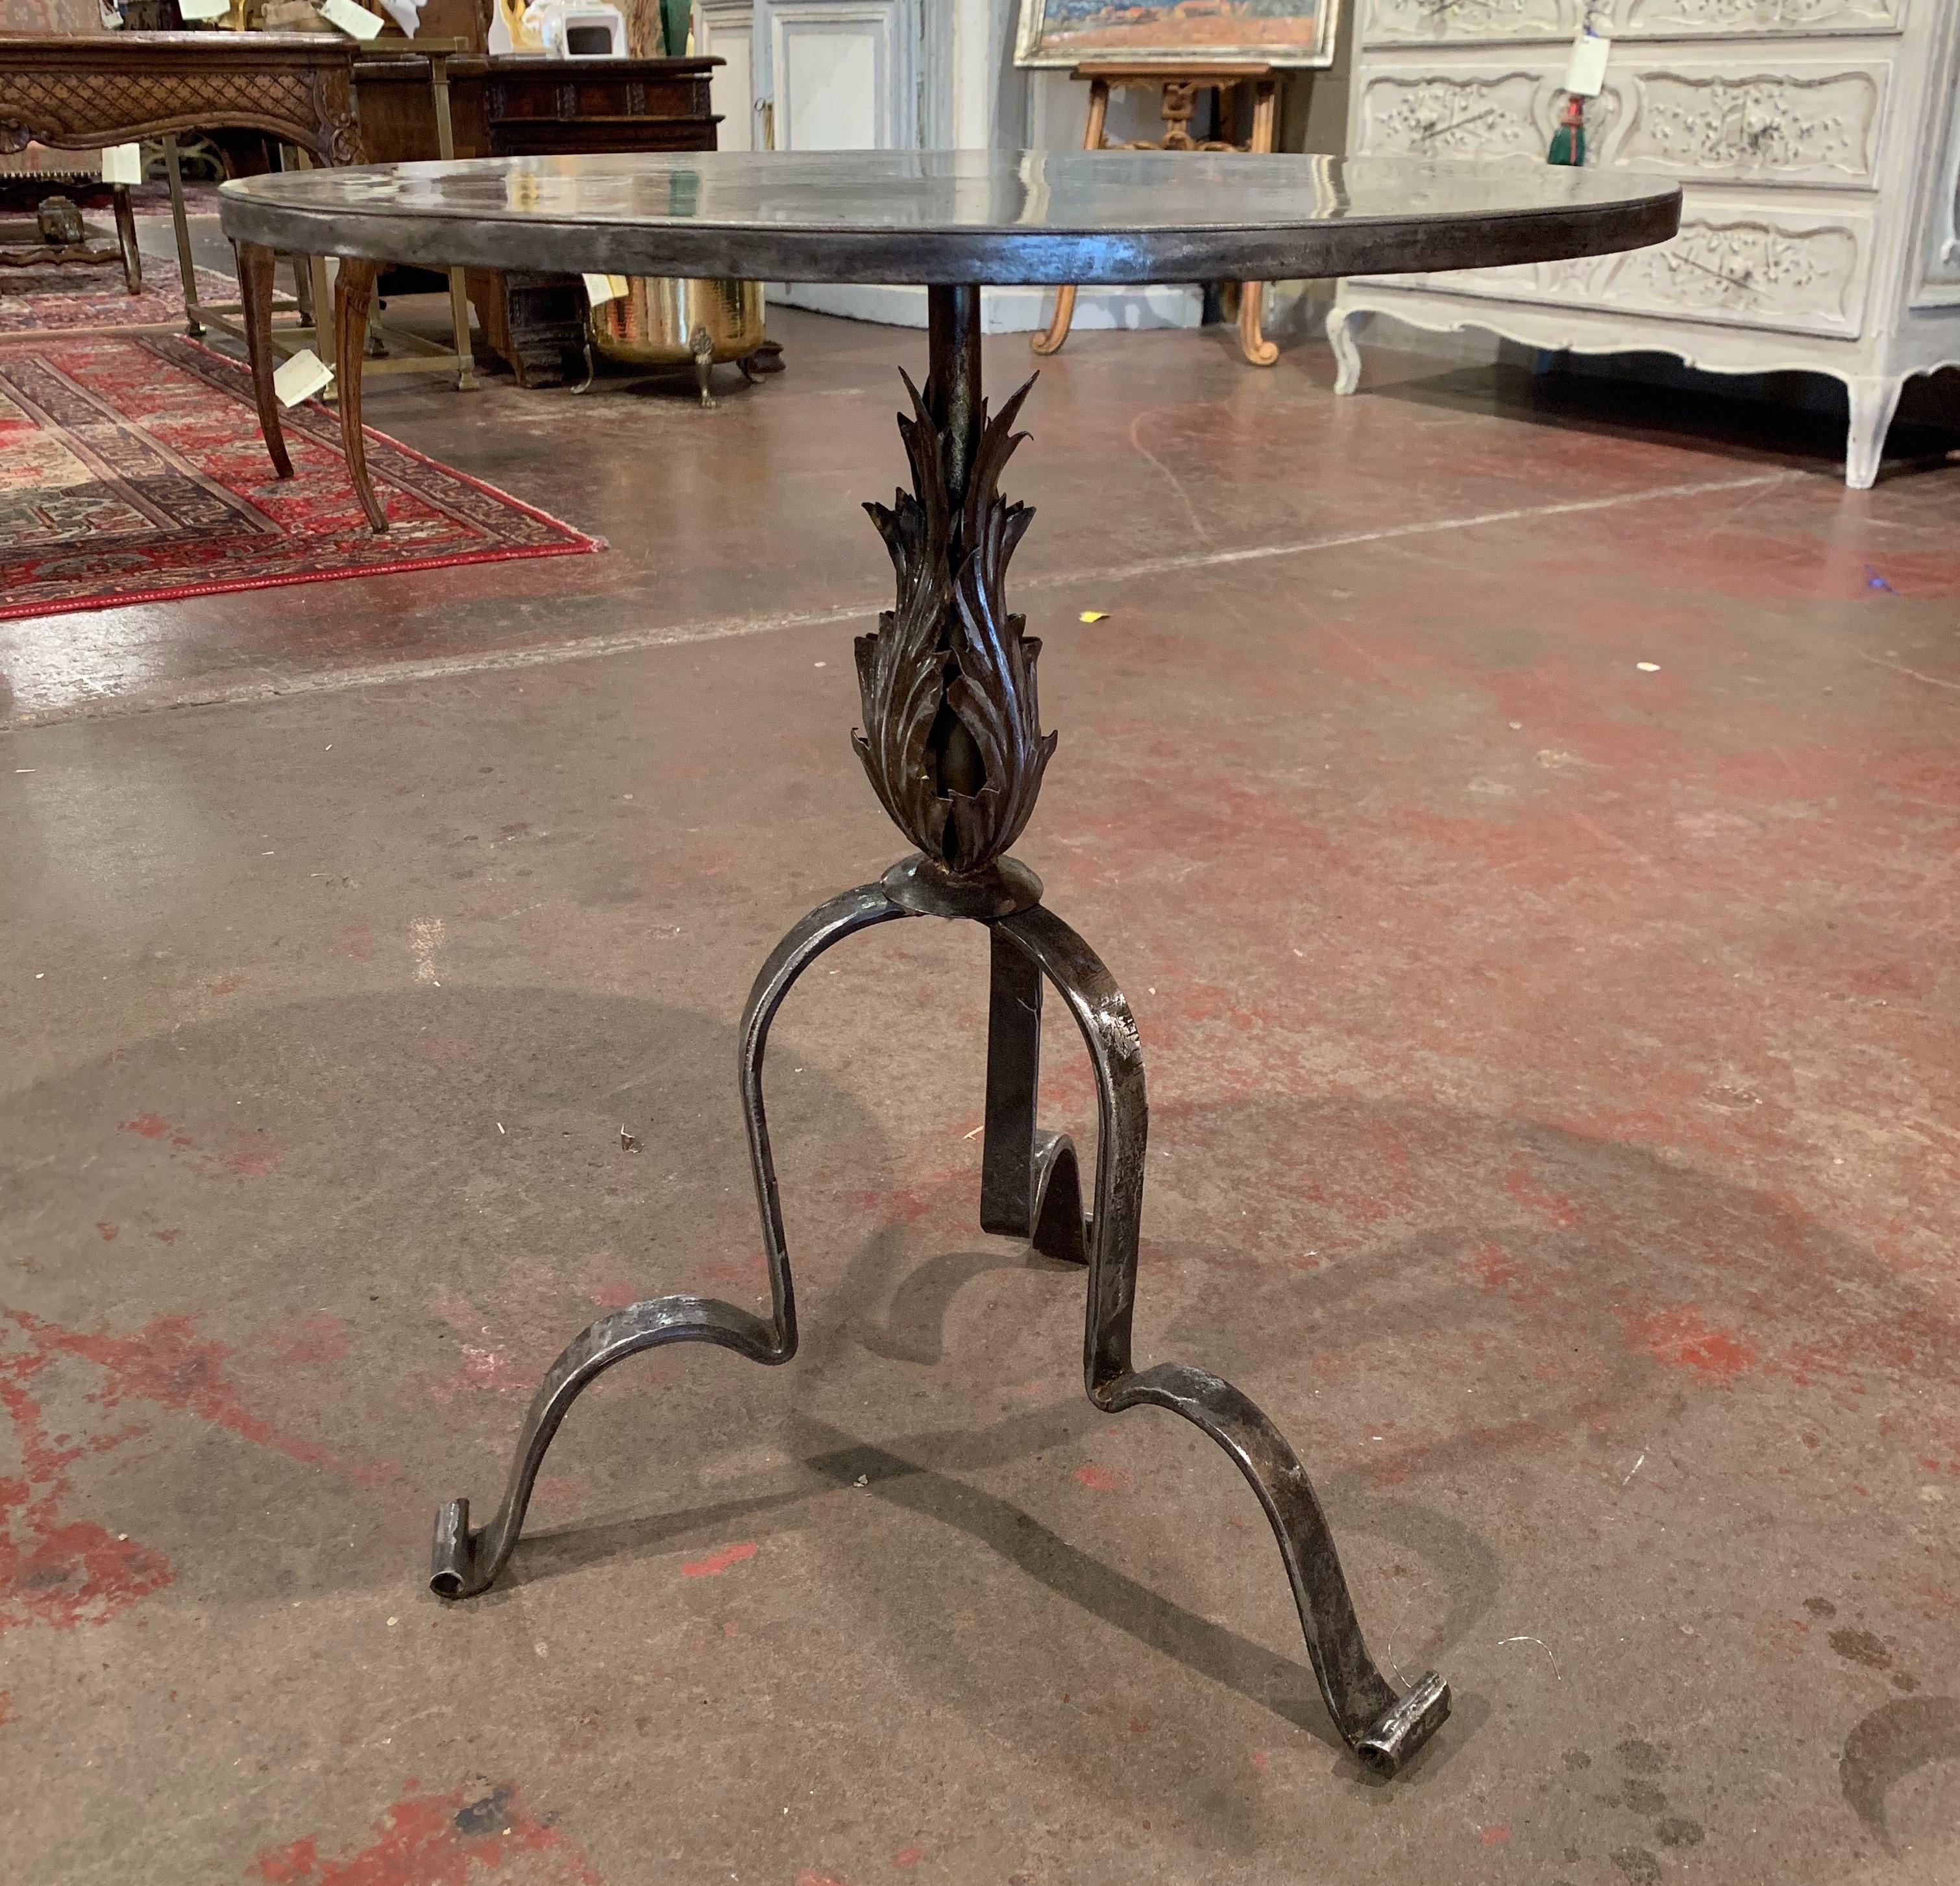 This elegant, antique Gothic pedestal table was crafted in Southern France, circa 1920. The intricate martini table stands on three forged feet over a central pedestal stem embellished with acanthus leaf motifs. The serving table is topped with a